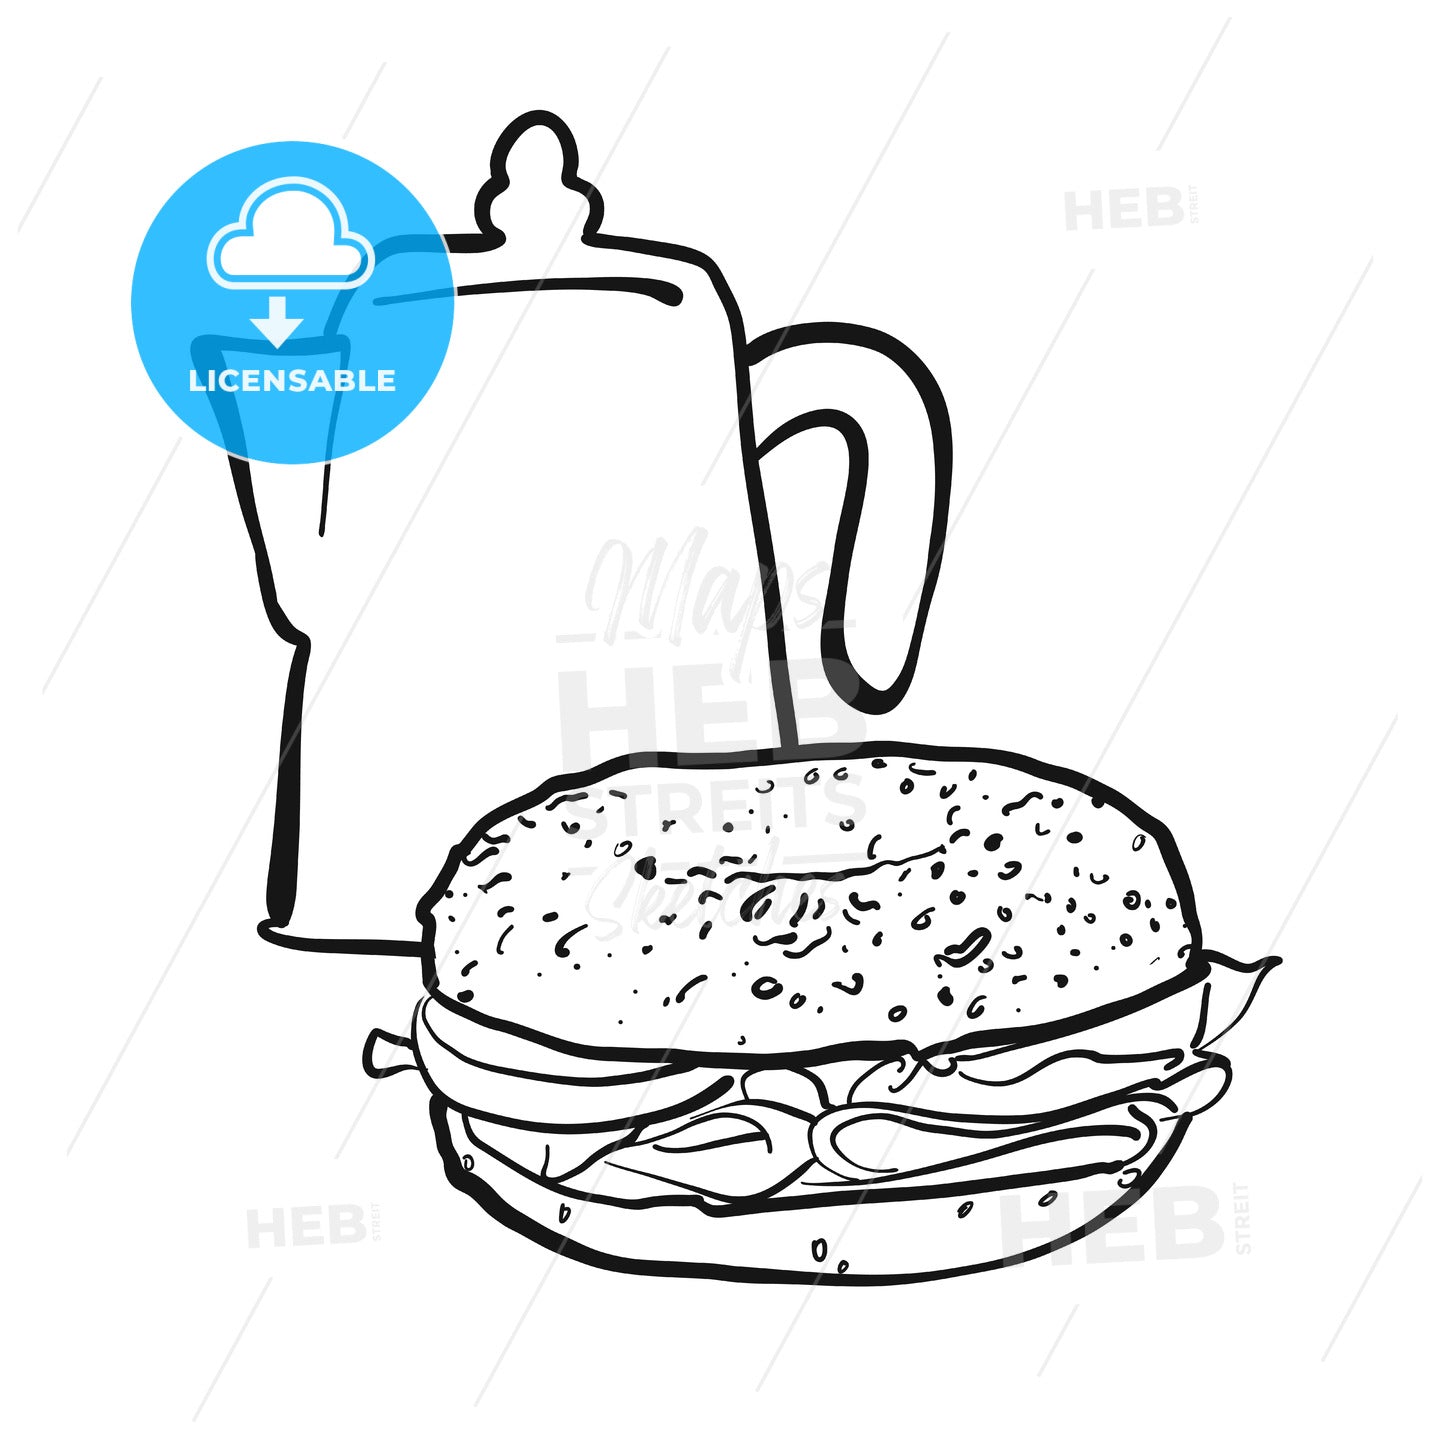 Coffee pot and bagel – instant download